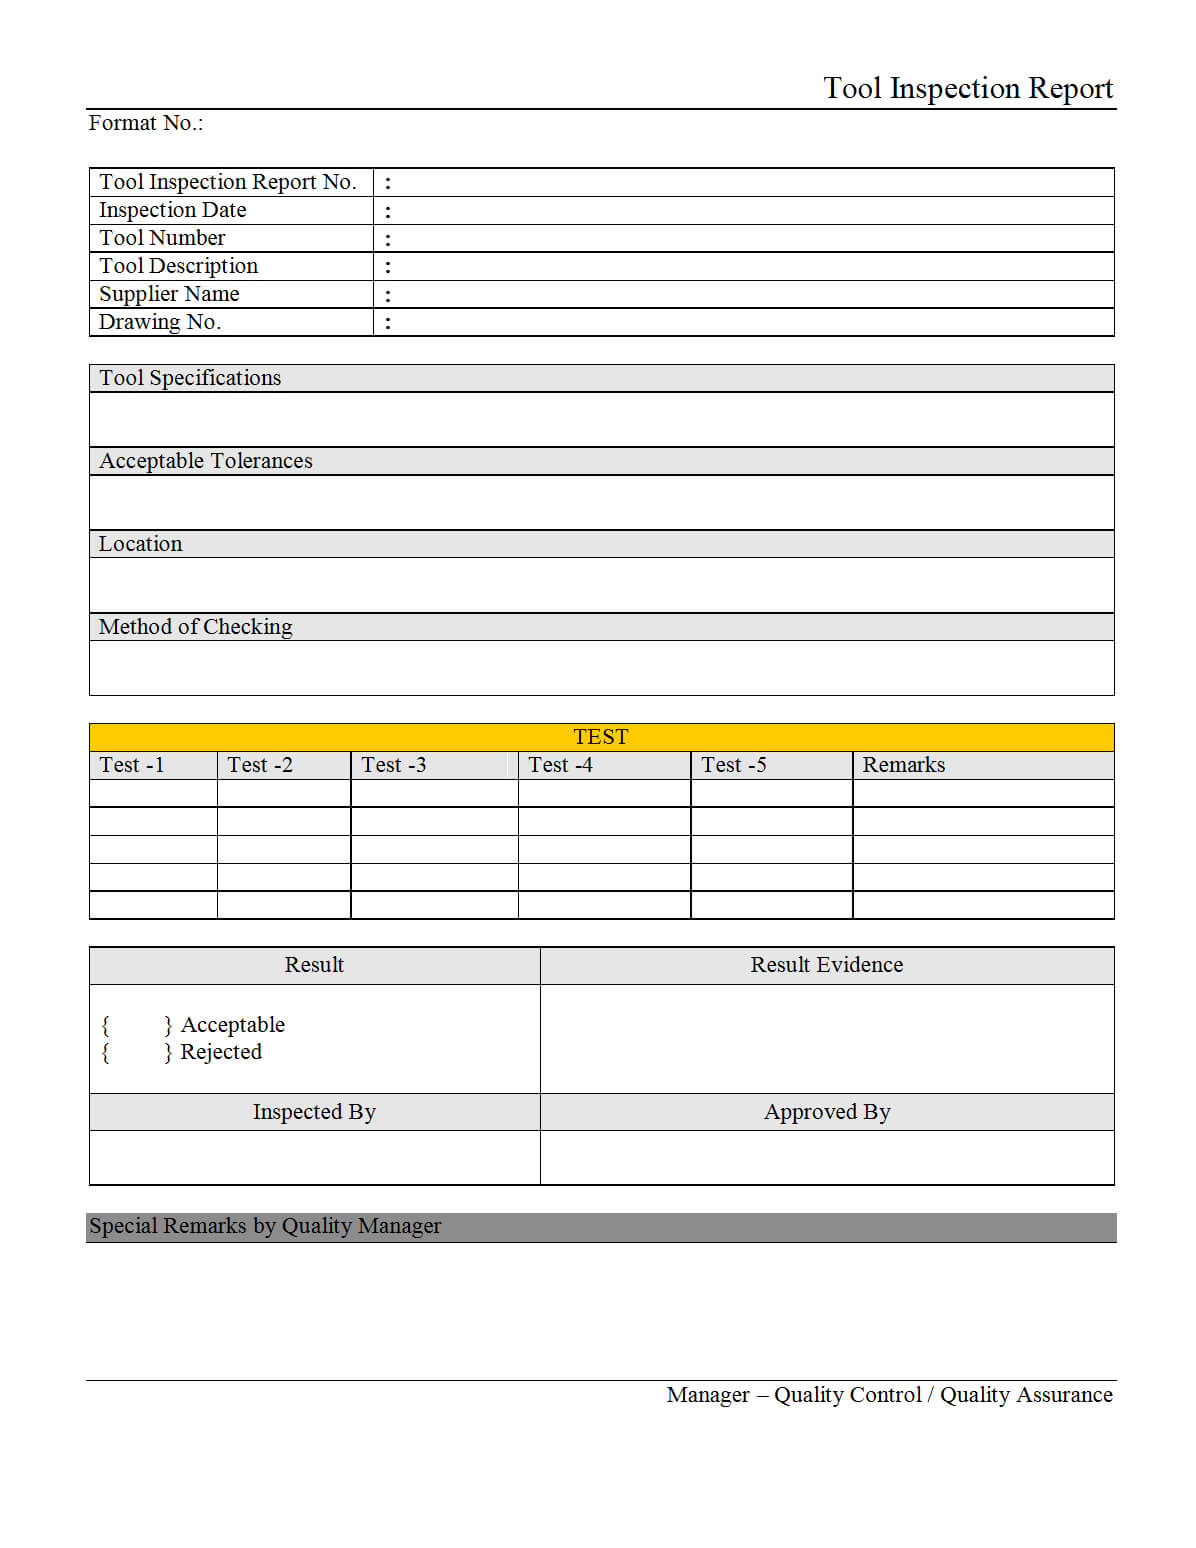 Tool Inspection Report - With Part Inspection Report Template